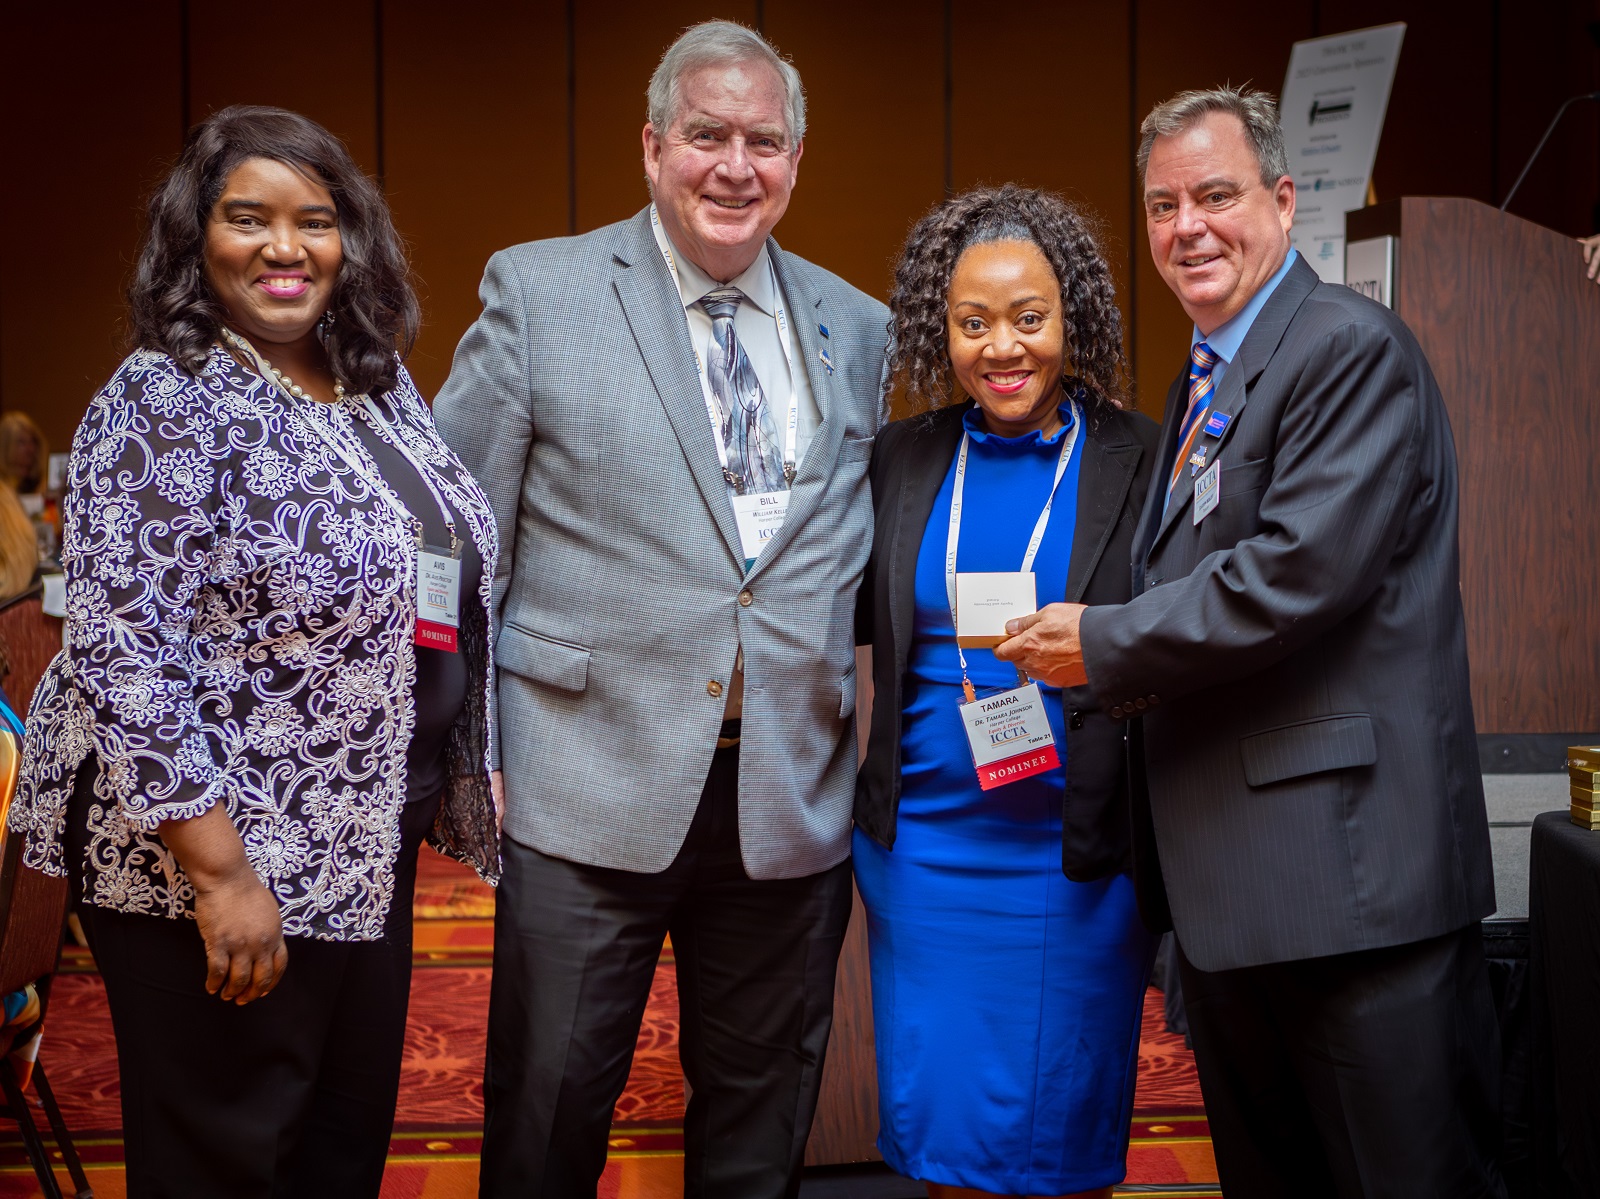 Dr. Avis Proctor, William F. Kelley and Dr. Tamara A. Johnson accept the 2023 Equity and Diversity Award from ICCTA Treasurer Shawn Boldt.